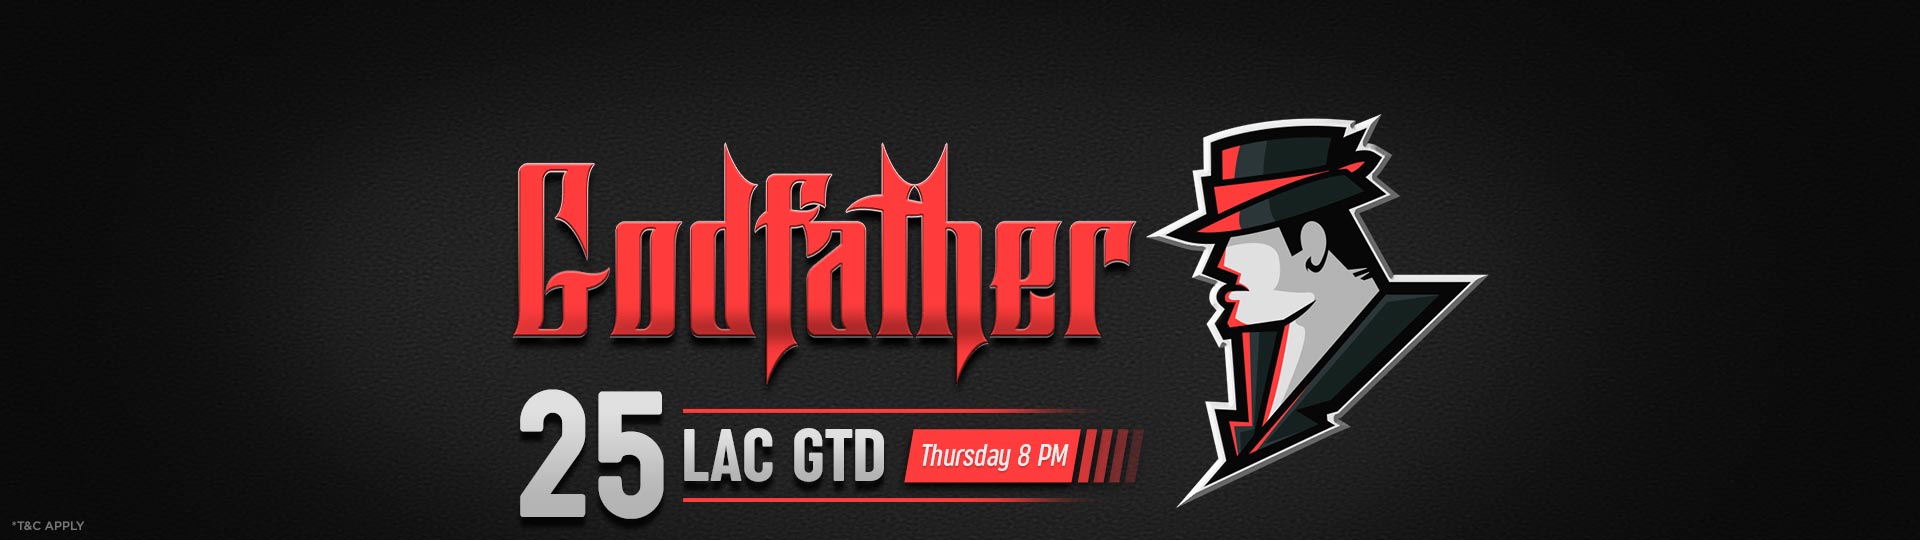 Adda52 GODFATHER Poker Tournament: Play and Win 25 Lac GTD